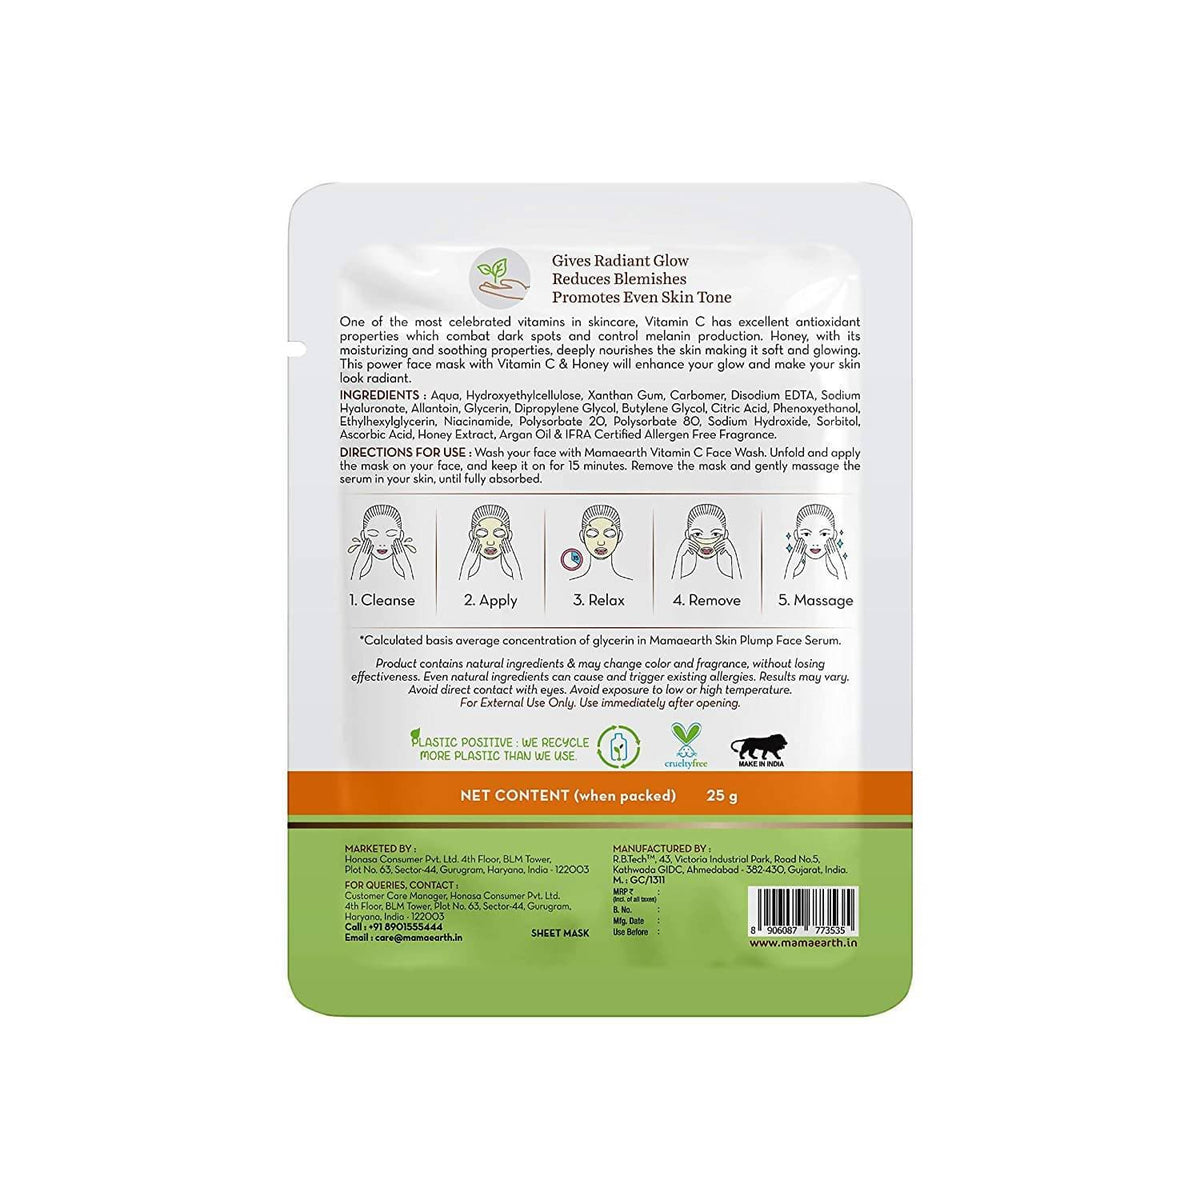 Picture of Mamaearth Vitamin C Bamboo Sheet Mask For Skin Illumination - Pack of 1 - 25 grams